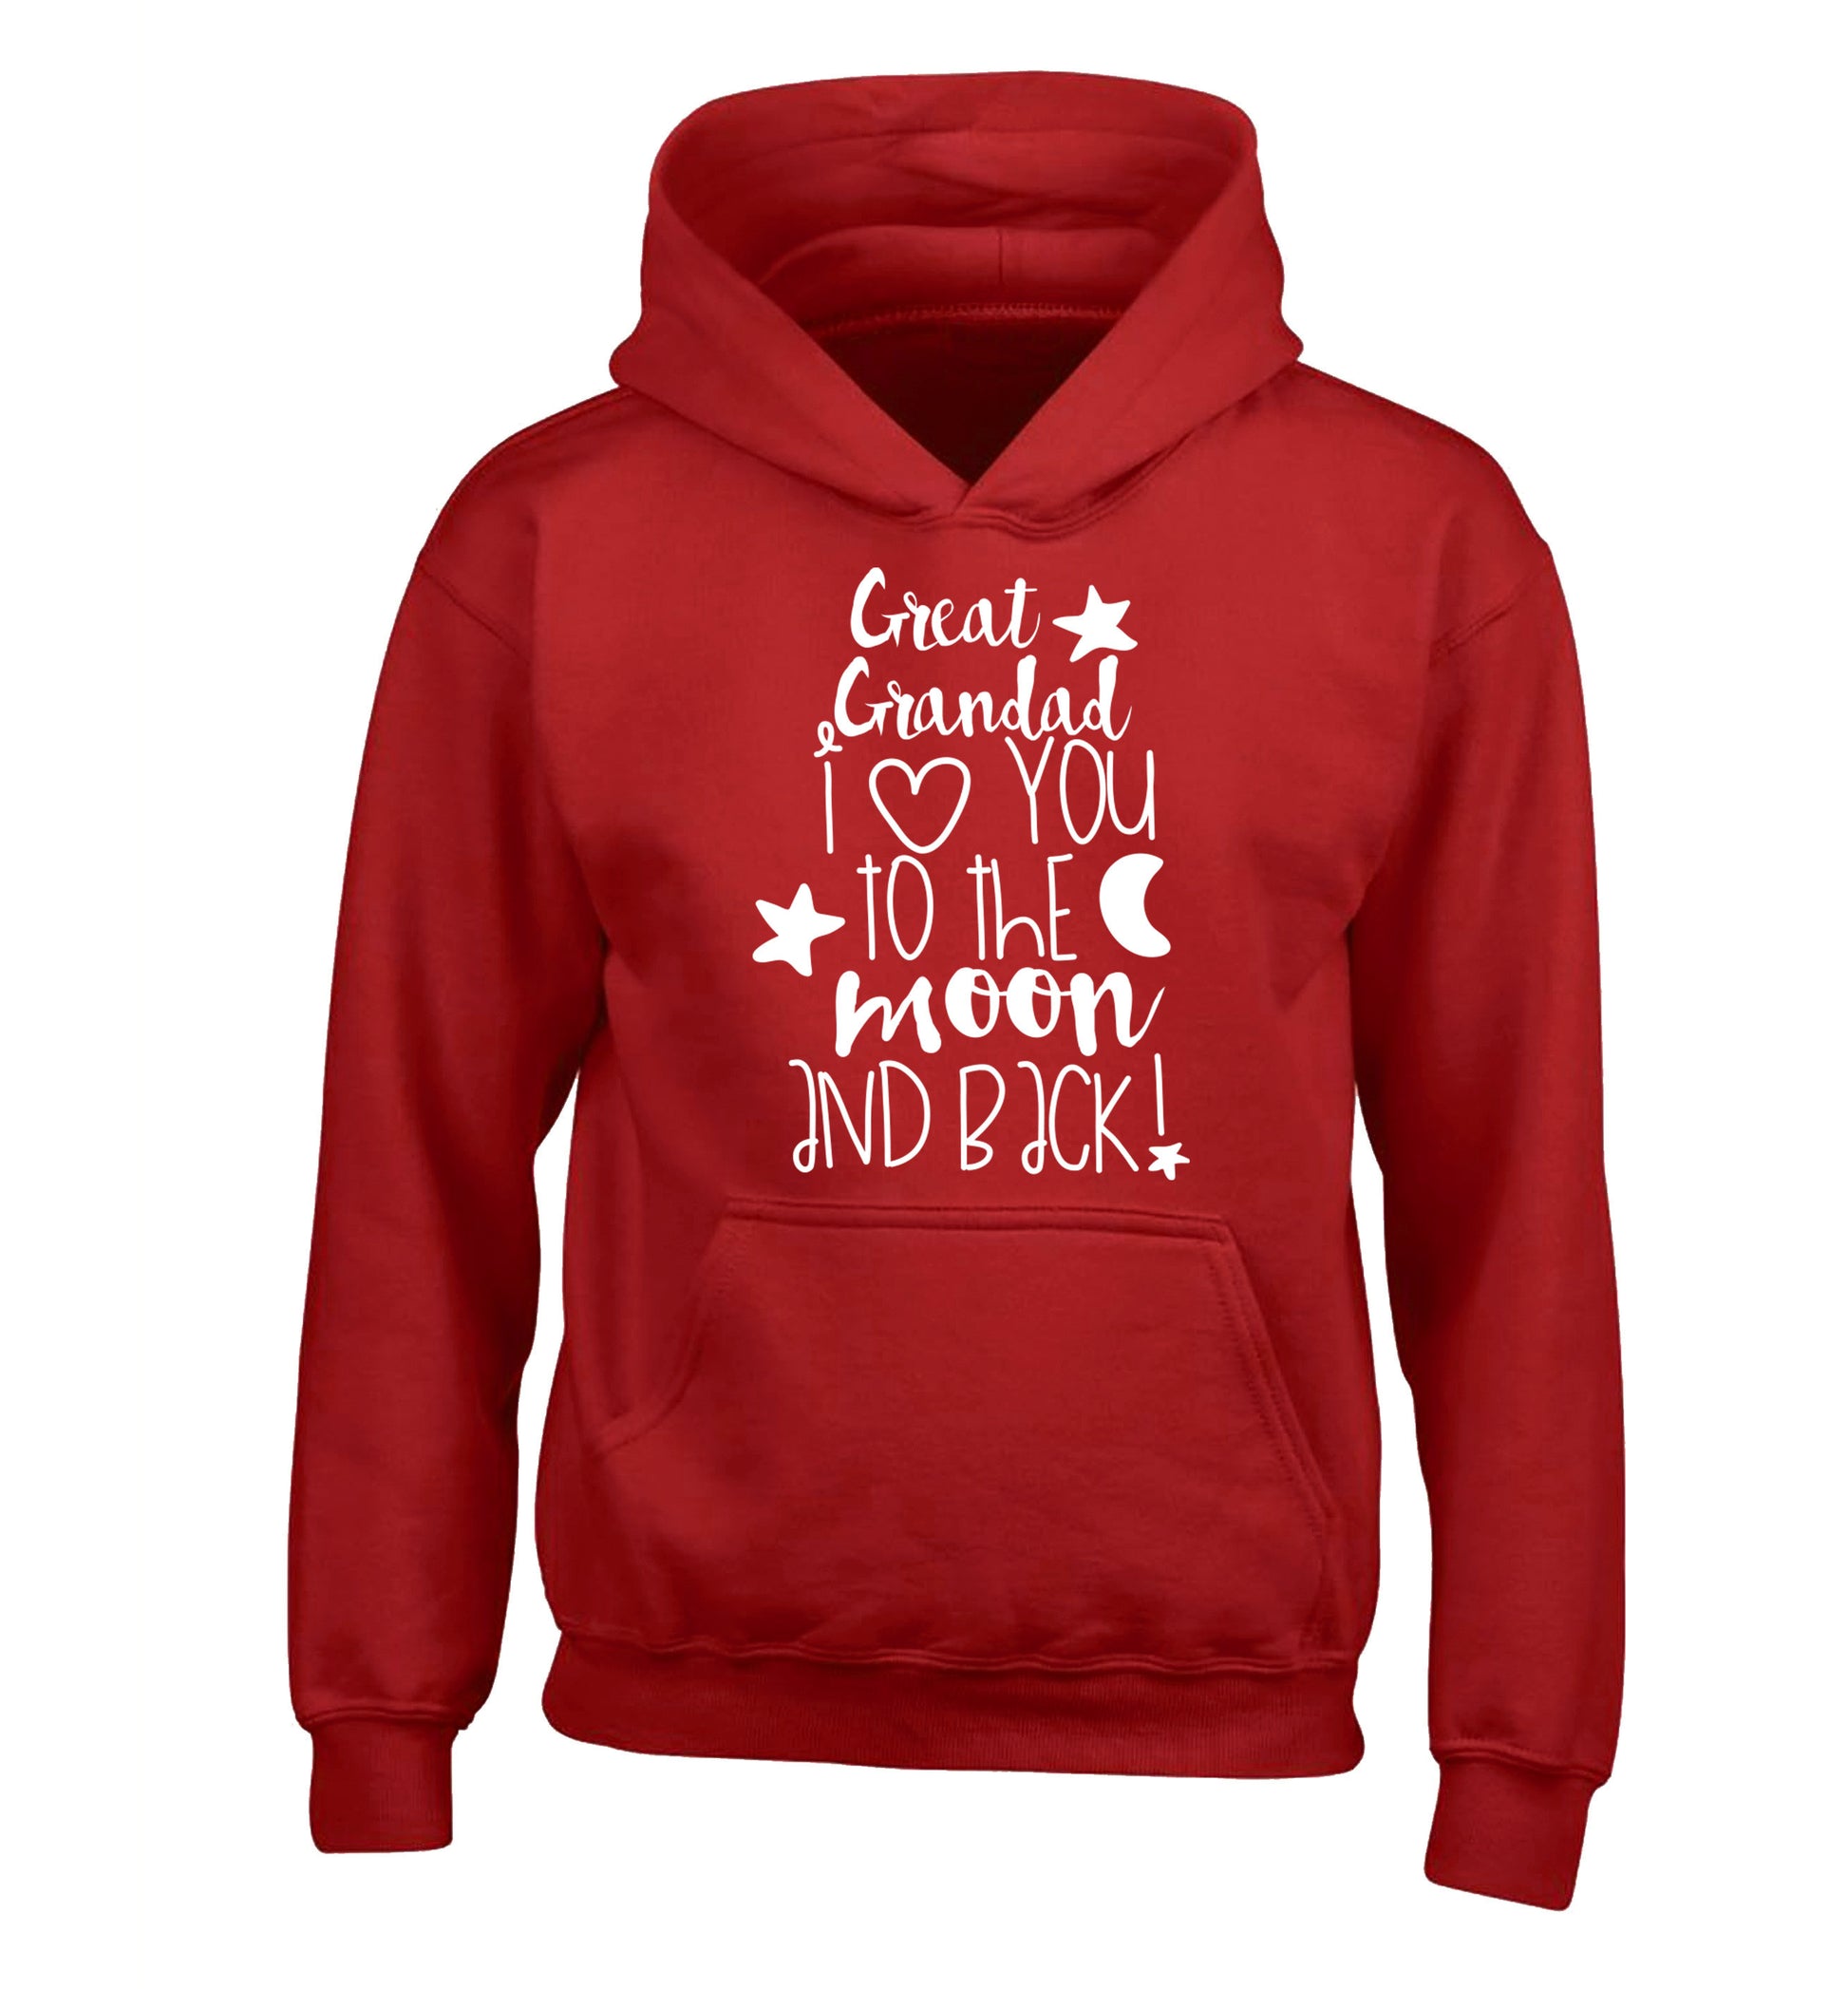 Great Grandad I love you to the moon and back children's red hoodie 12-14 Years